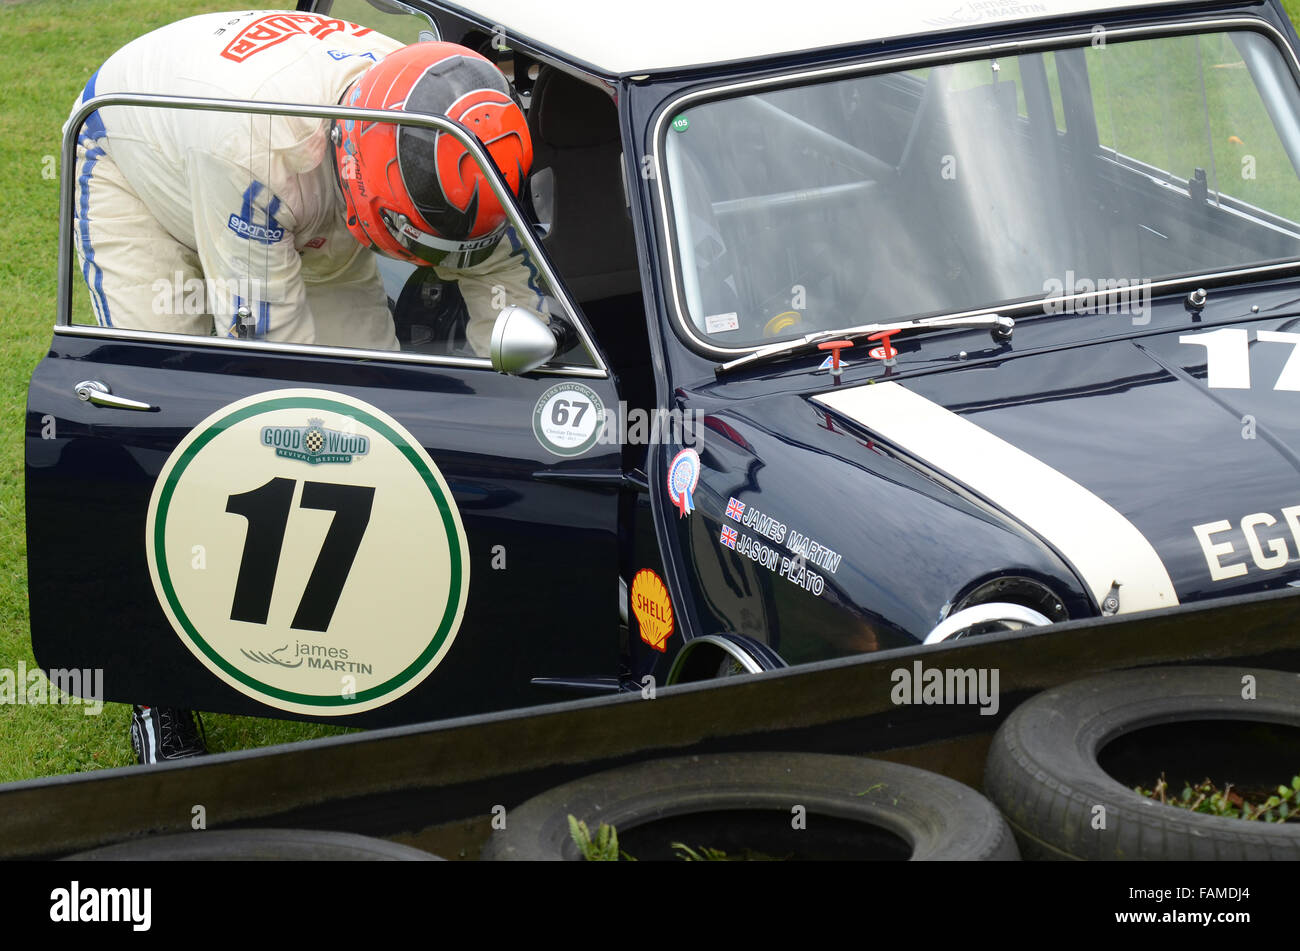 James Martin British chef and TV presenter best known for presenting the BBC's Saturday Kitchen. Owns and races a Mini, slid off at Goodwood Revival Stock Photo